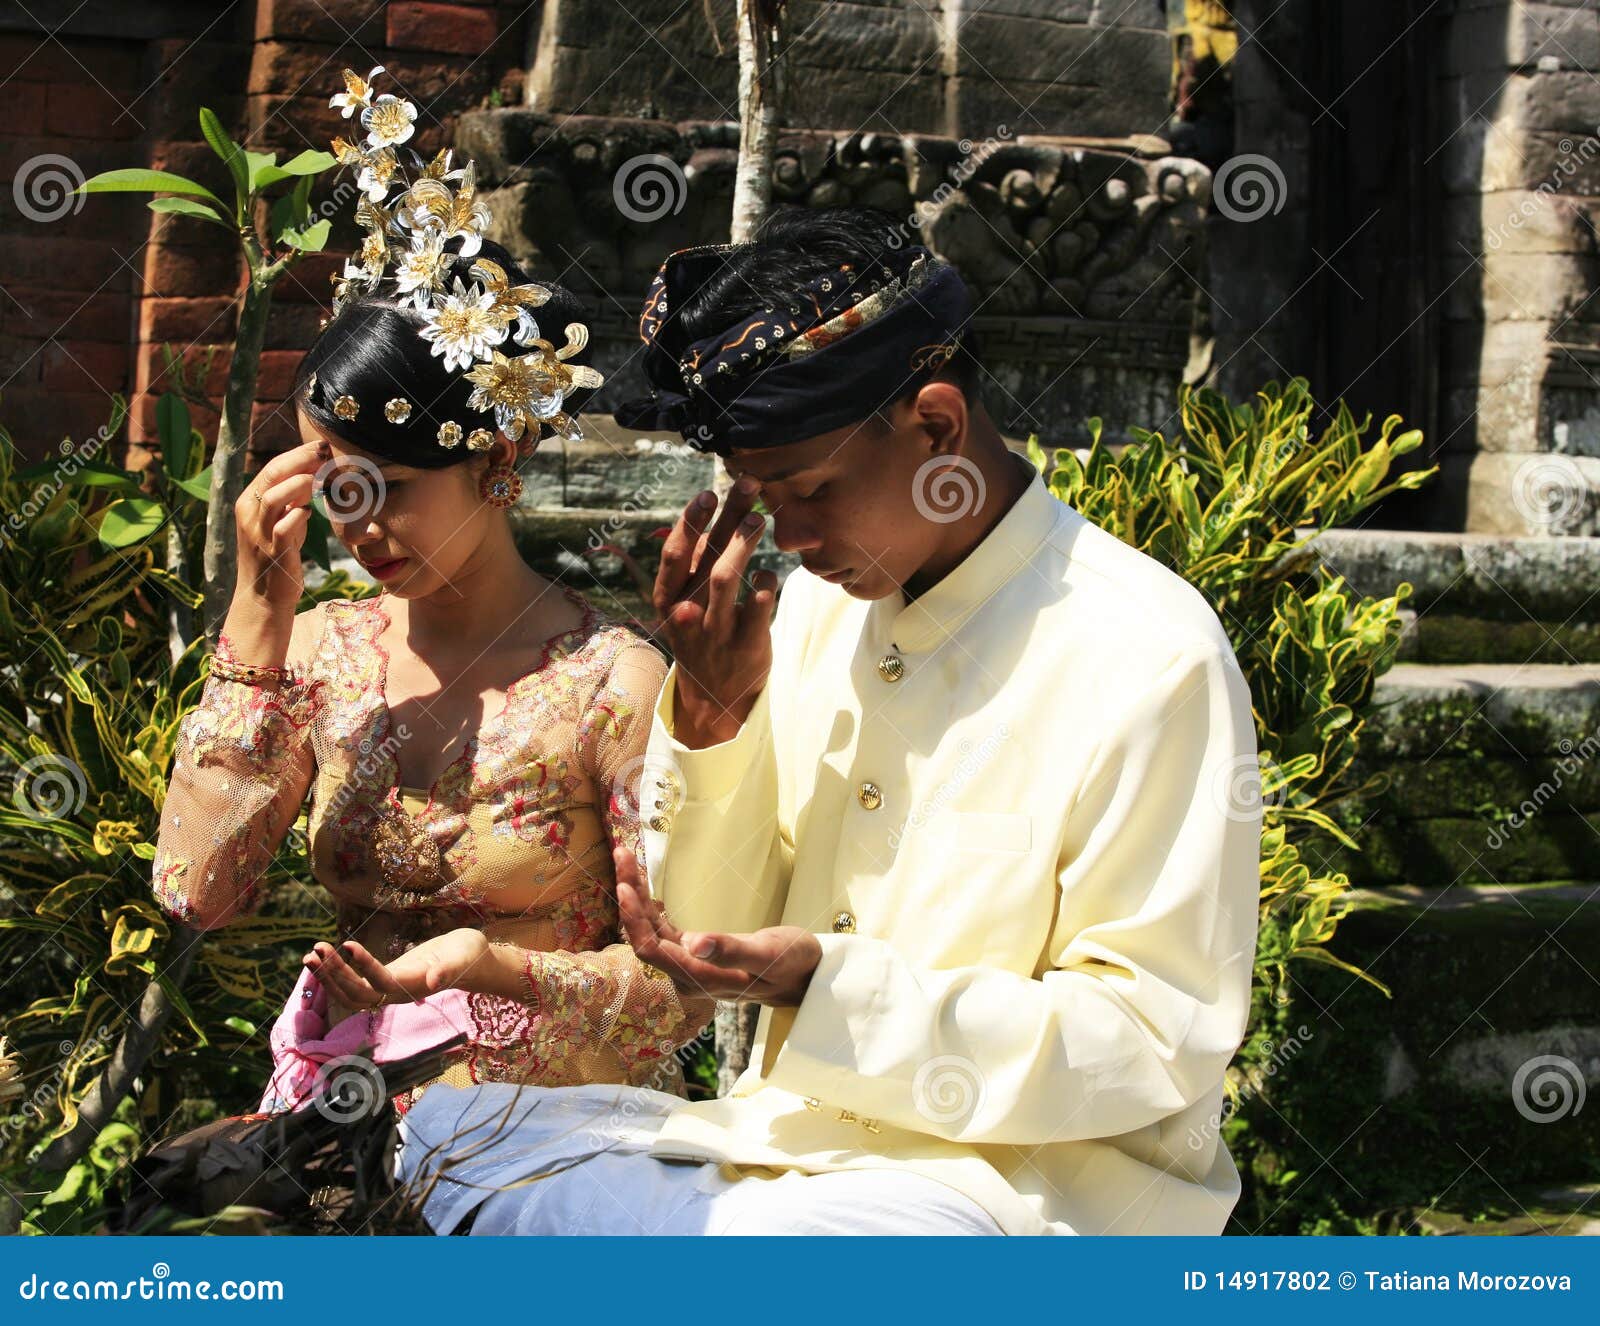 Download this The Moment Wedding Ceremony Indonesian picture